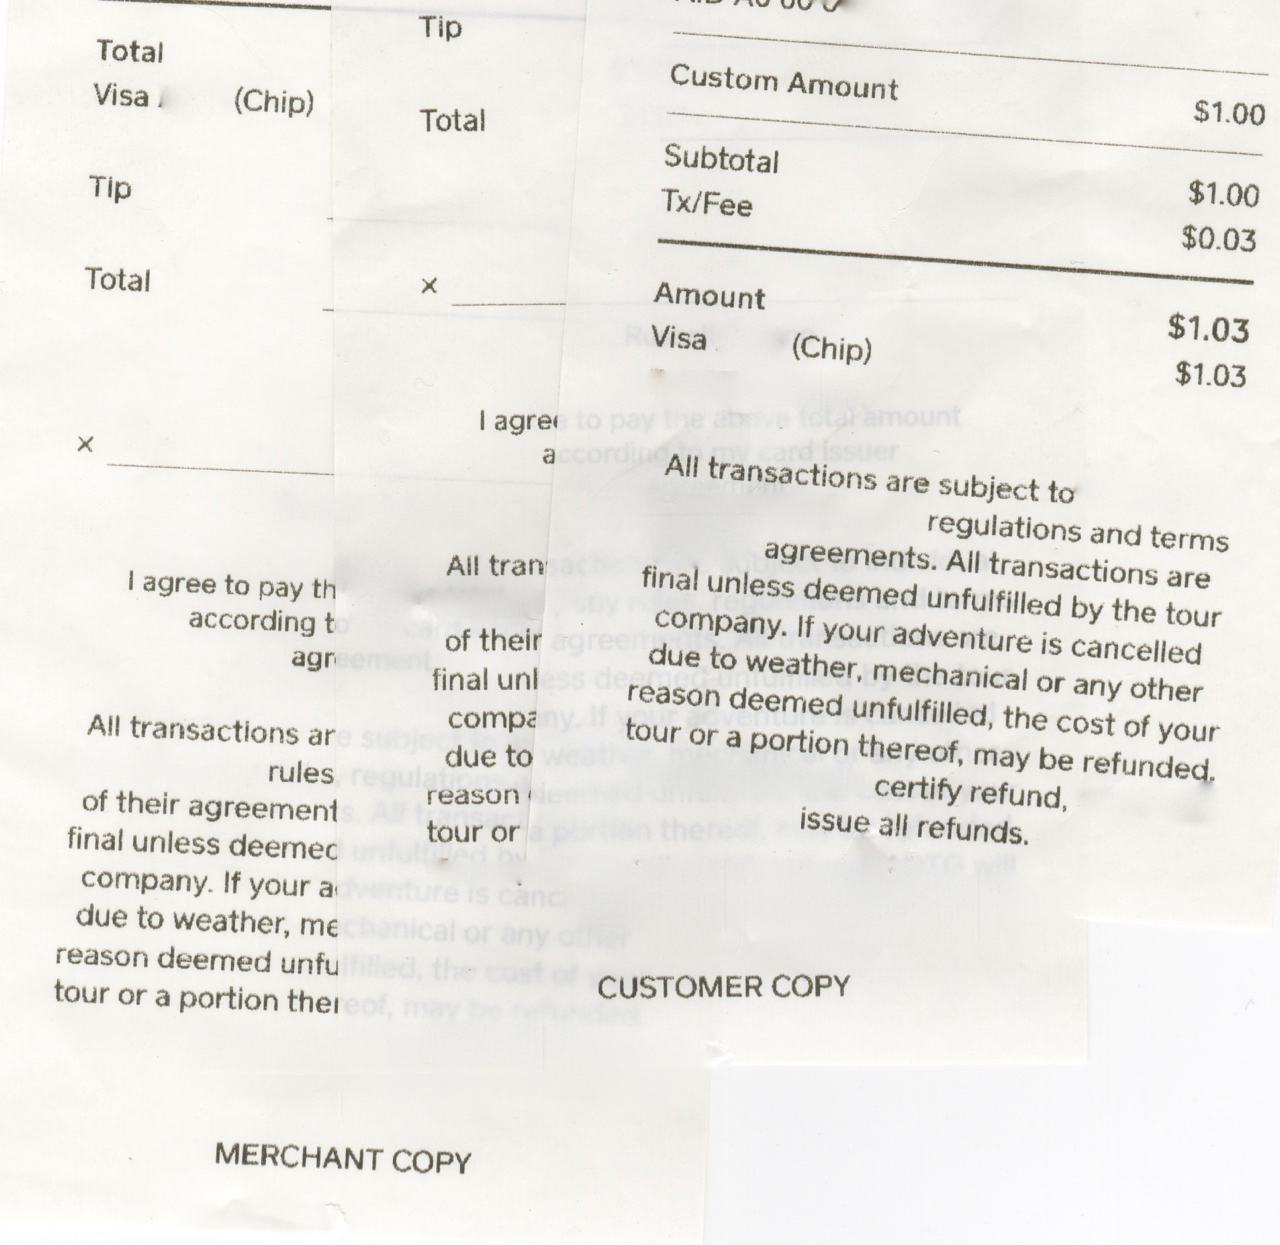 print-receipt-with-signature-the-seller-community